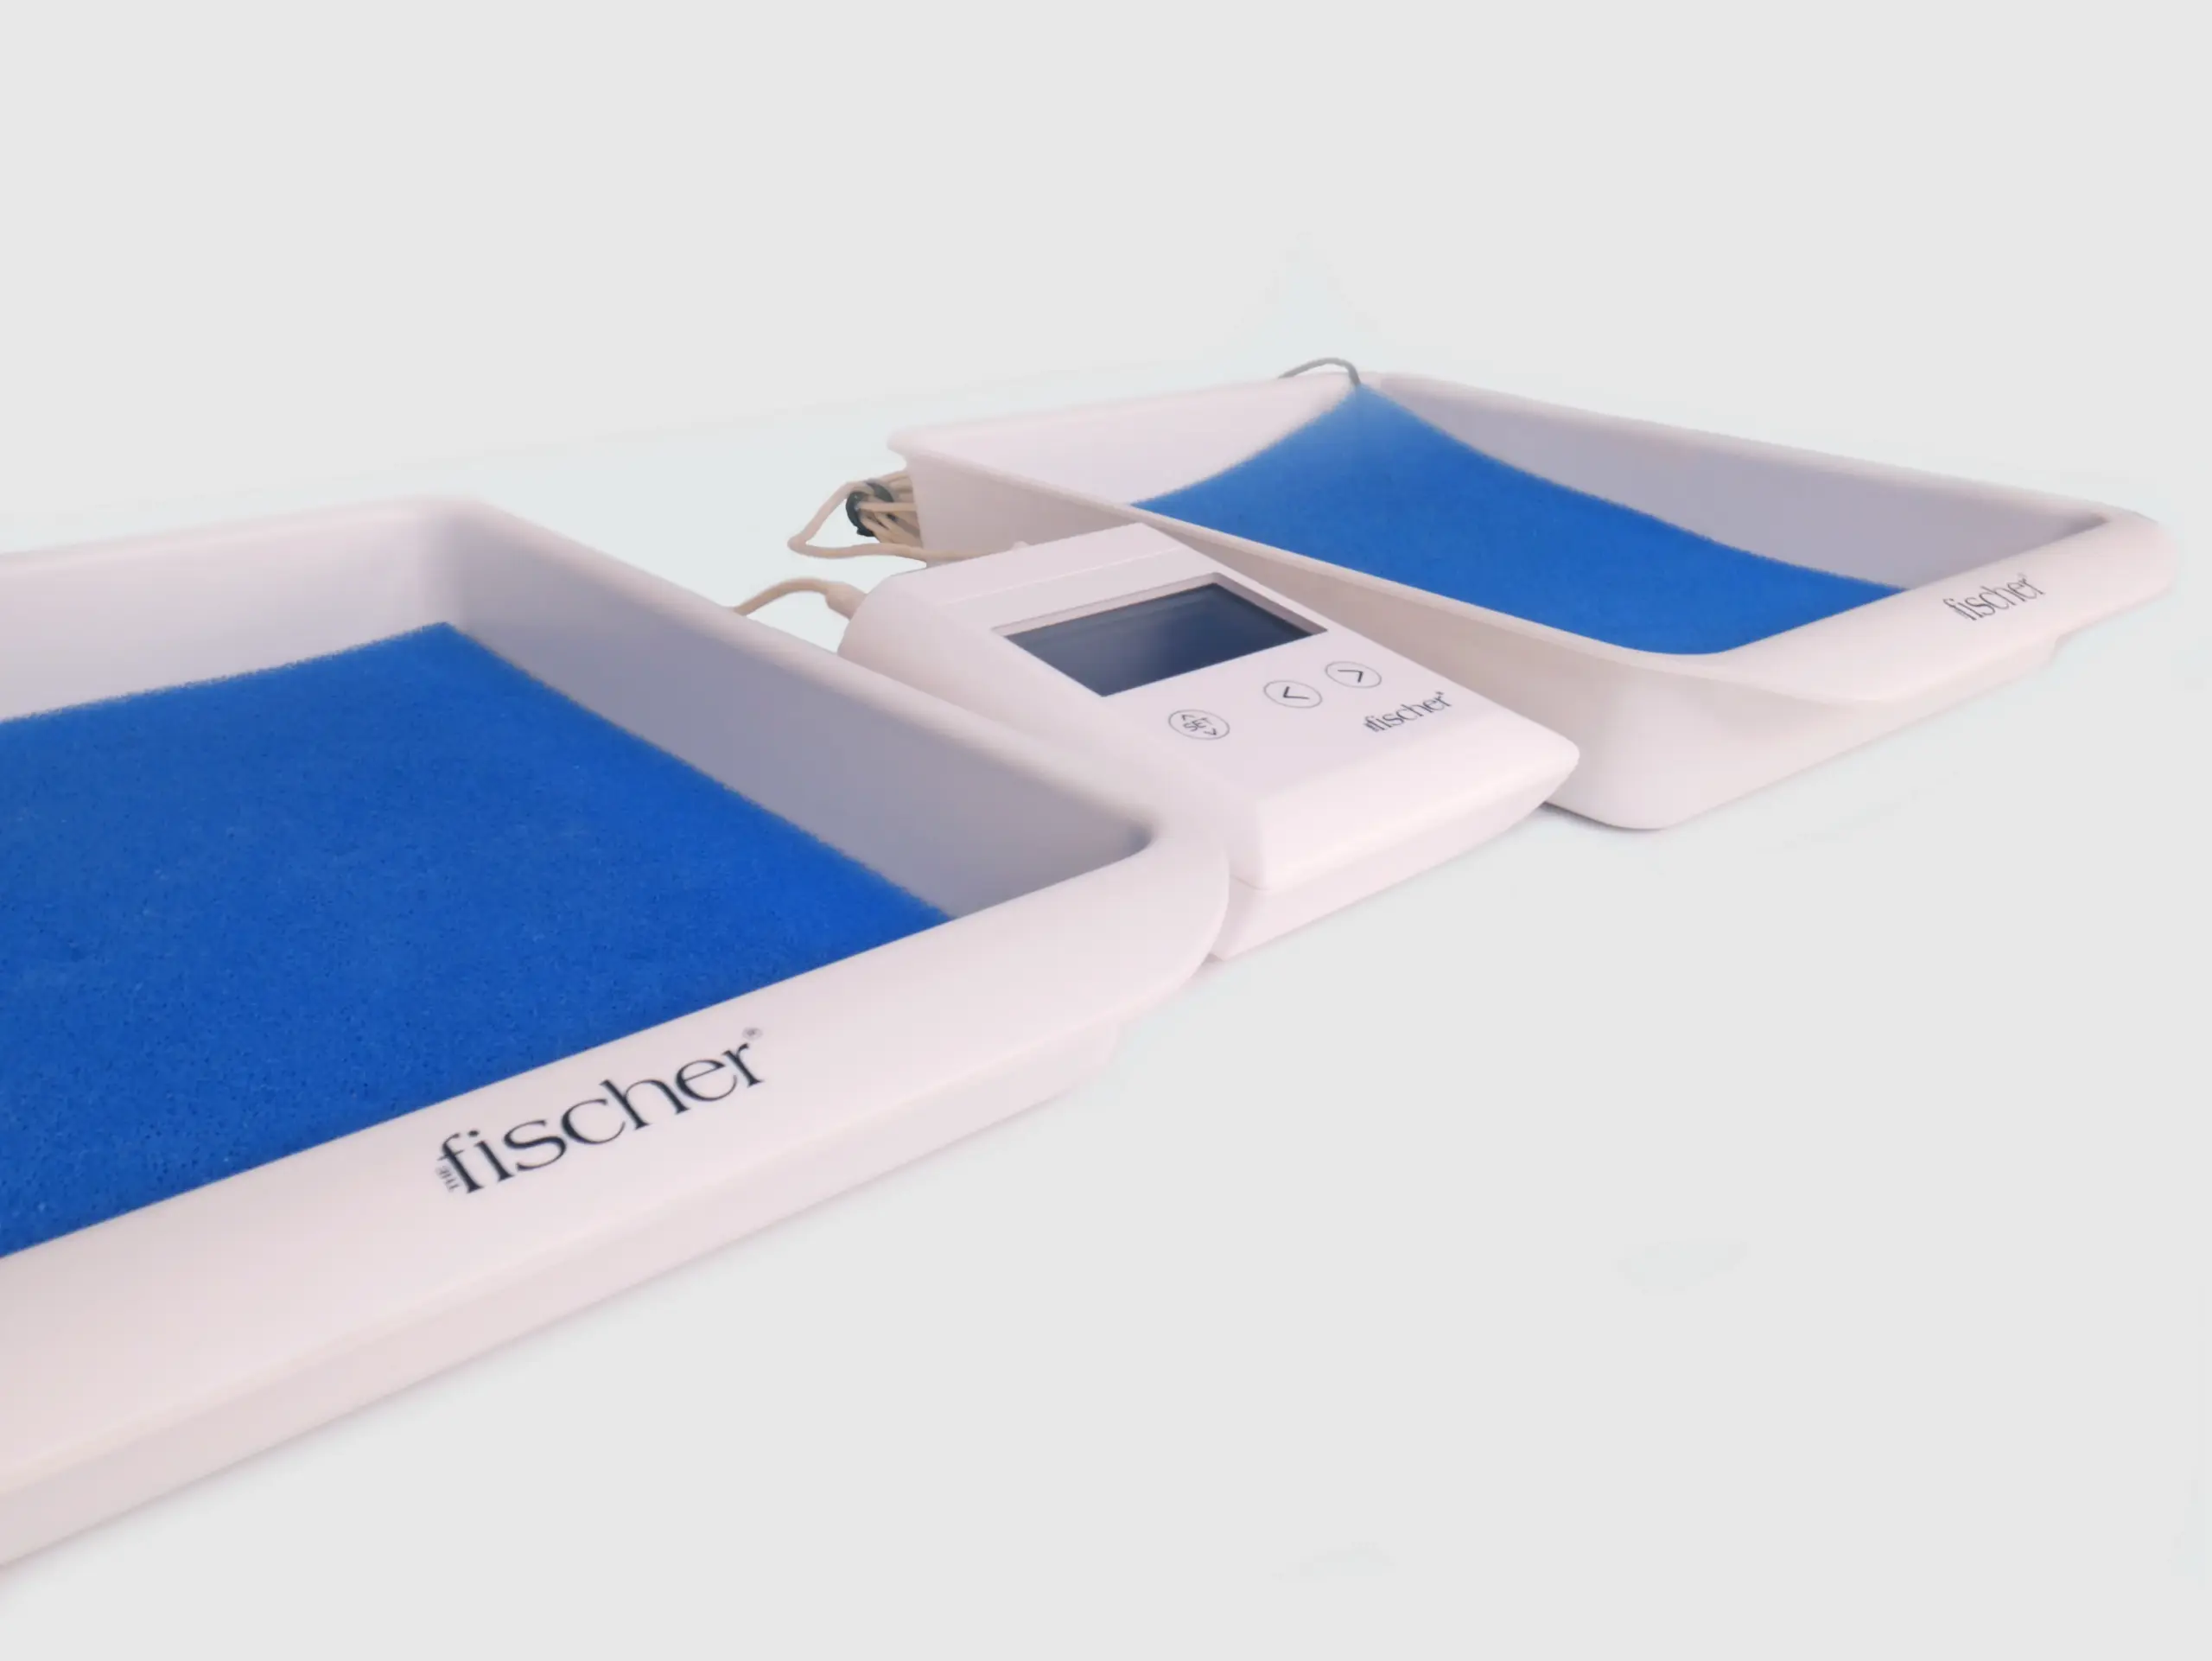 Angled photograph showcasing the white, rectangular 'main control unit' of RA Fischer's 'The Fischer' Device—an iontophoresis device designed for the treatment of hyperhidrosis (excessive sweating). The Fischer iontophoresis device is characterized by its white and rectangular shape with a blue and grey screen. On the left side of the device, there is a button labeled 'SET,' while two buttons on the right are represented by arrows. The Fischer device logo is placed in the bottom right corner. It is in between the water bath trays that have the blue ph-balancing foam and metal-free electrodes inside. There are cords visible behind the device. Iontophoresis Device for Sweating